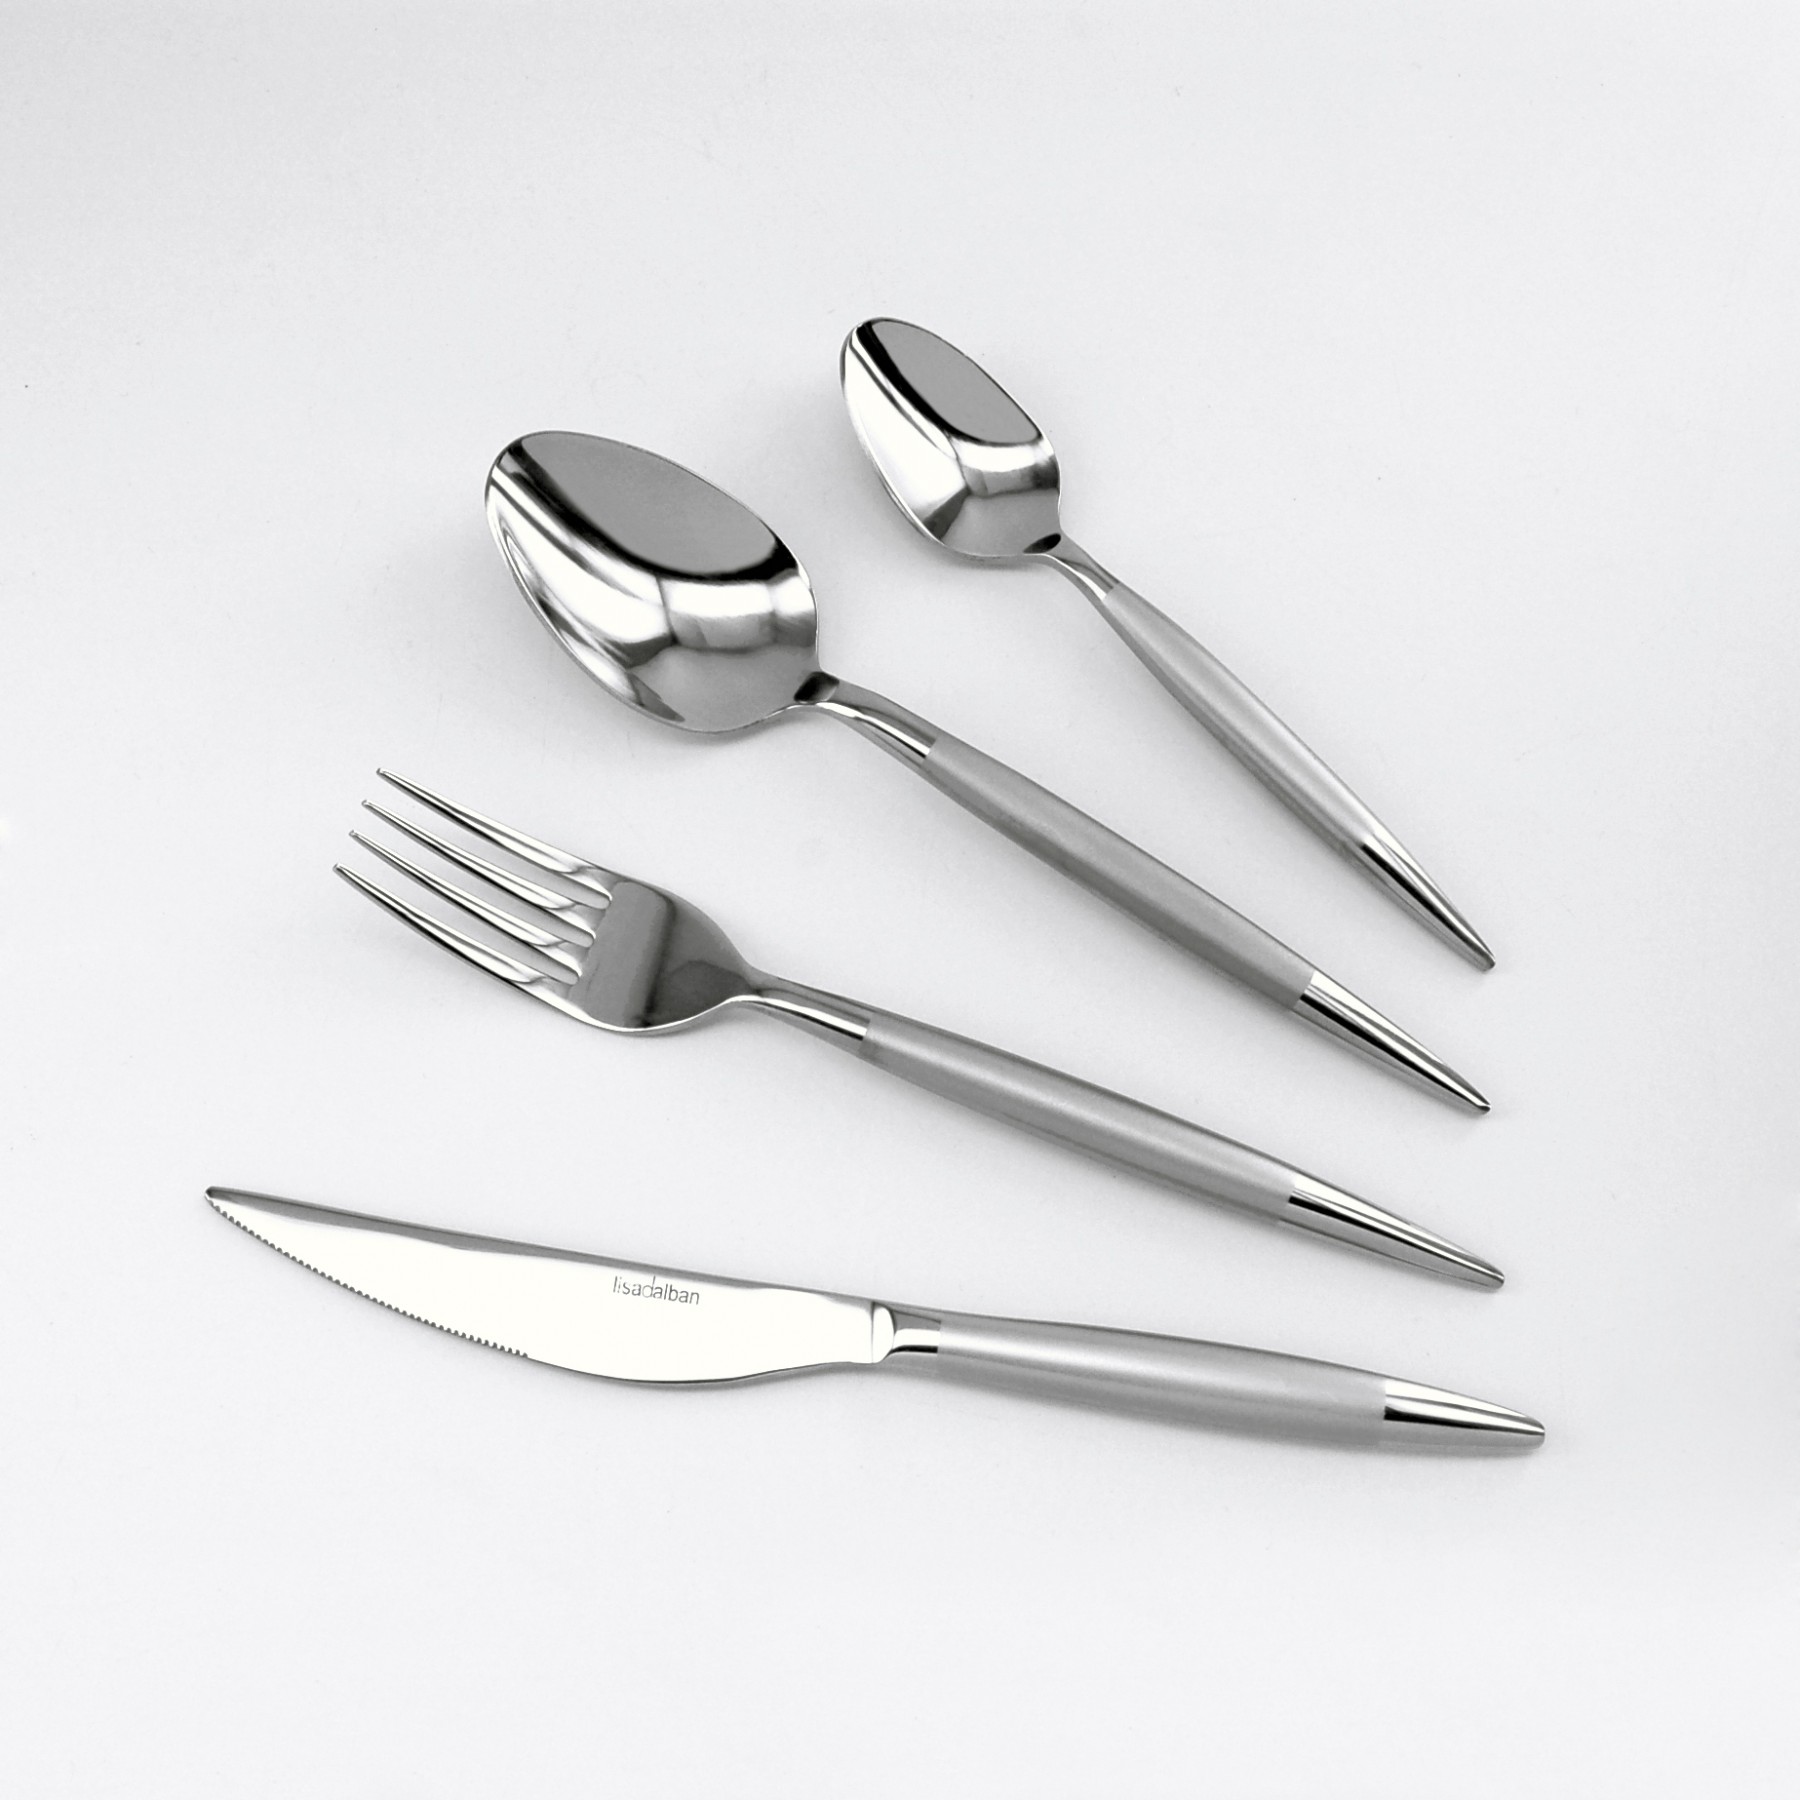 Alize - ménagere 16 pieces inox charme